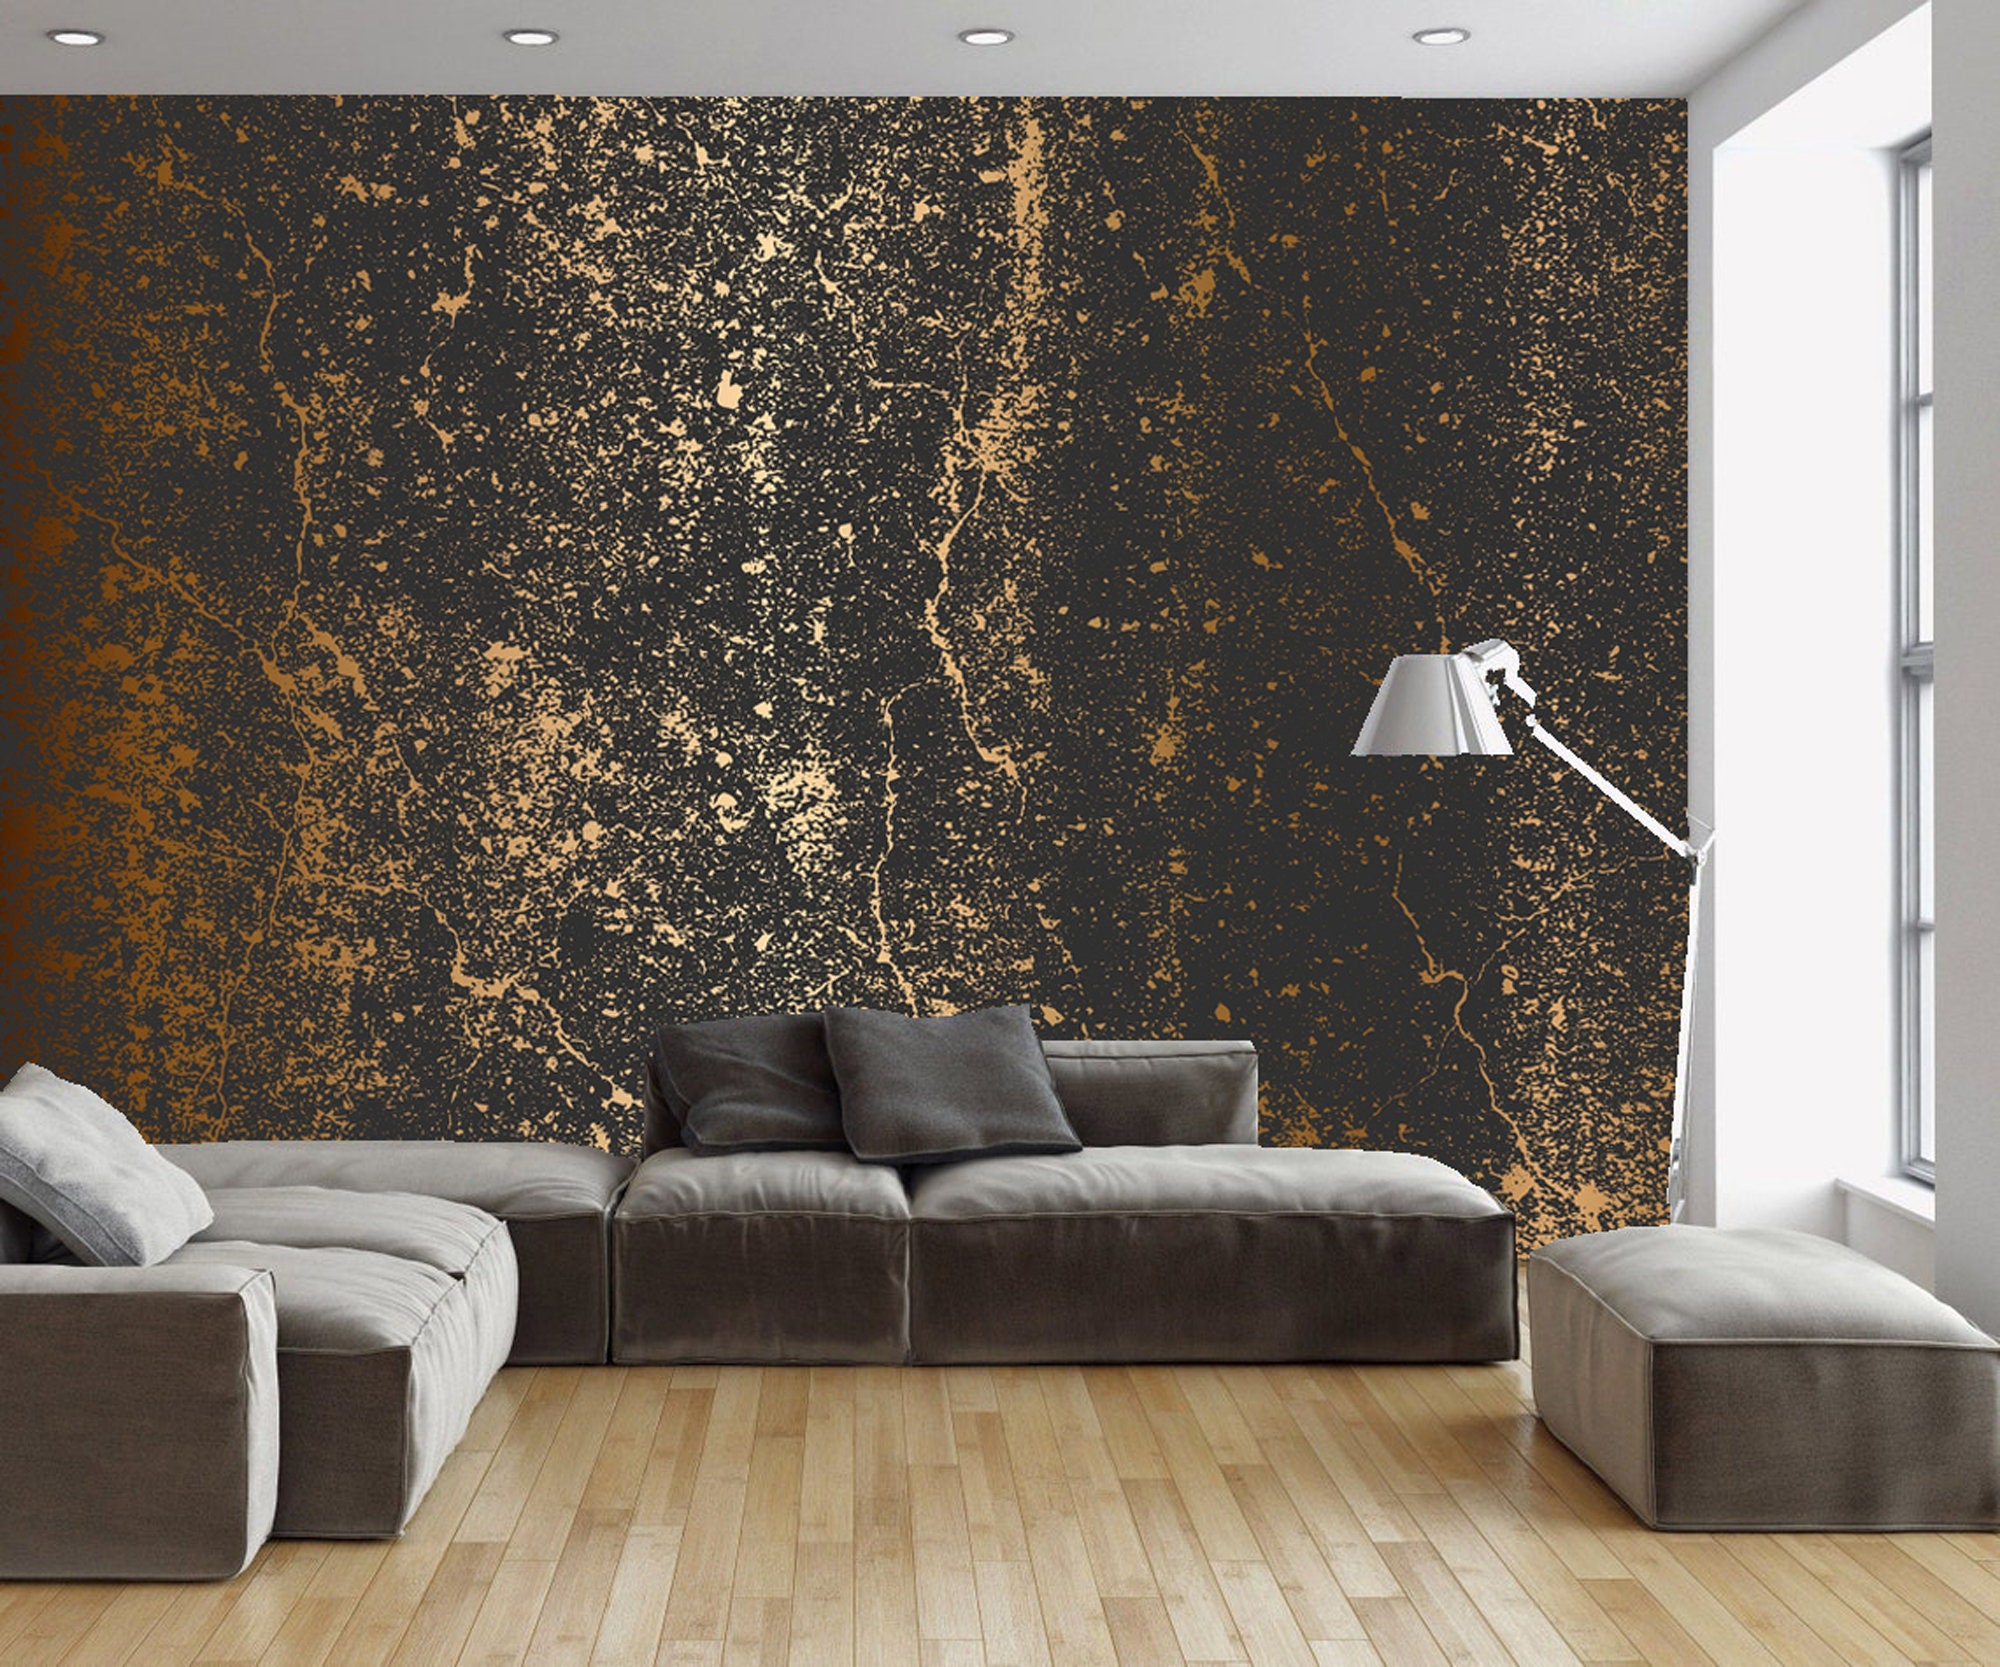 Removable Concrete Look Wallpaper Stone Wallpaper Gold - Etsy